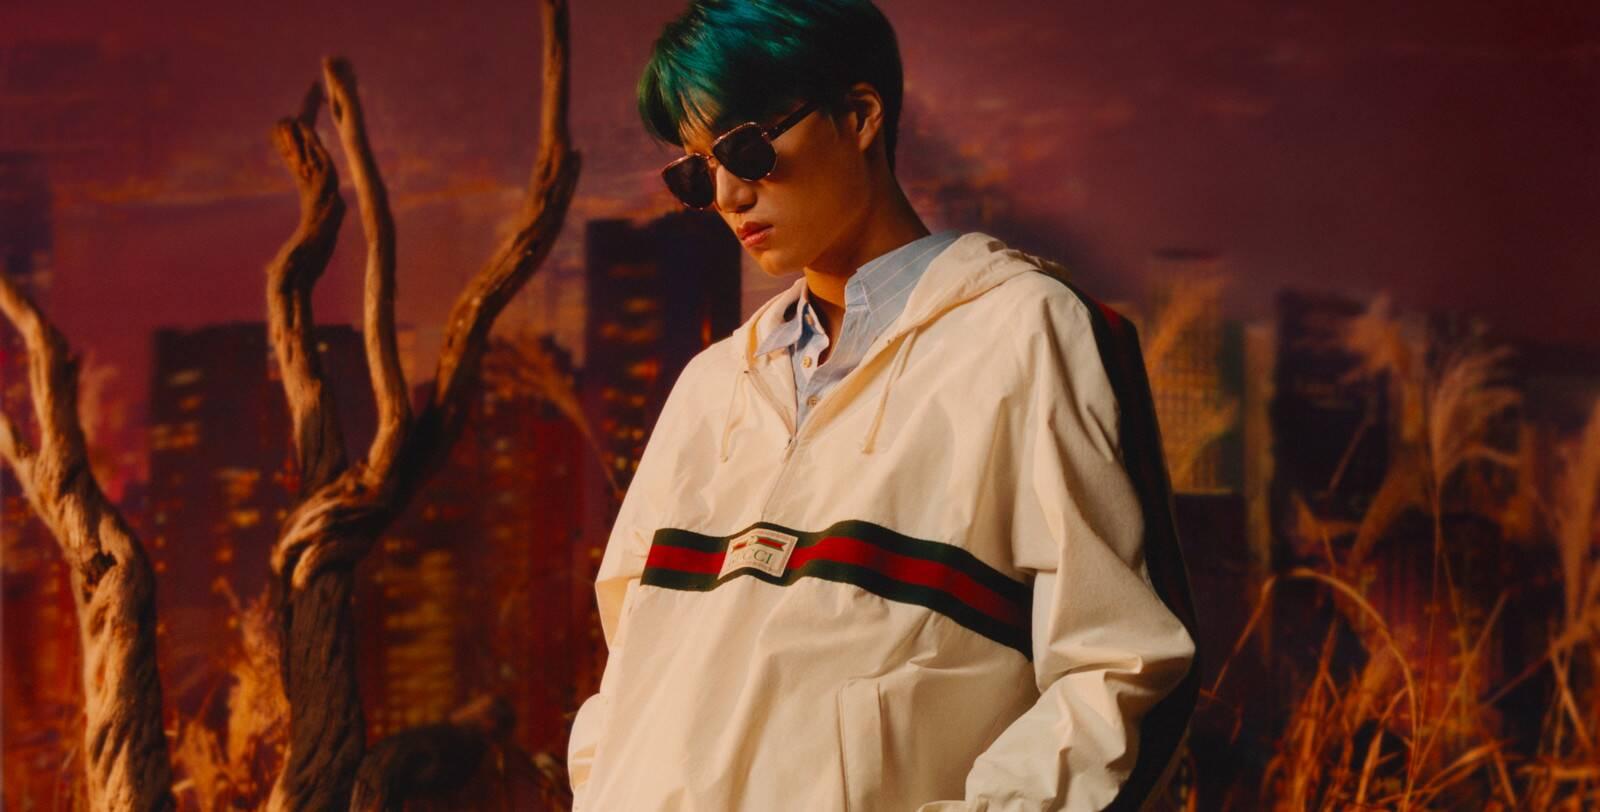 EXO's Kai becomes the first Korean global ambassador for Gucci